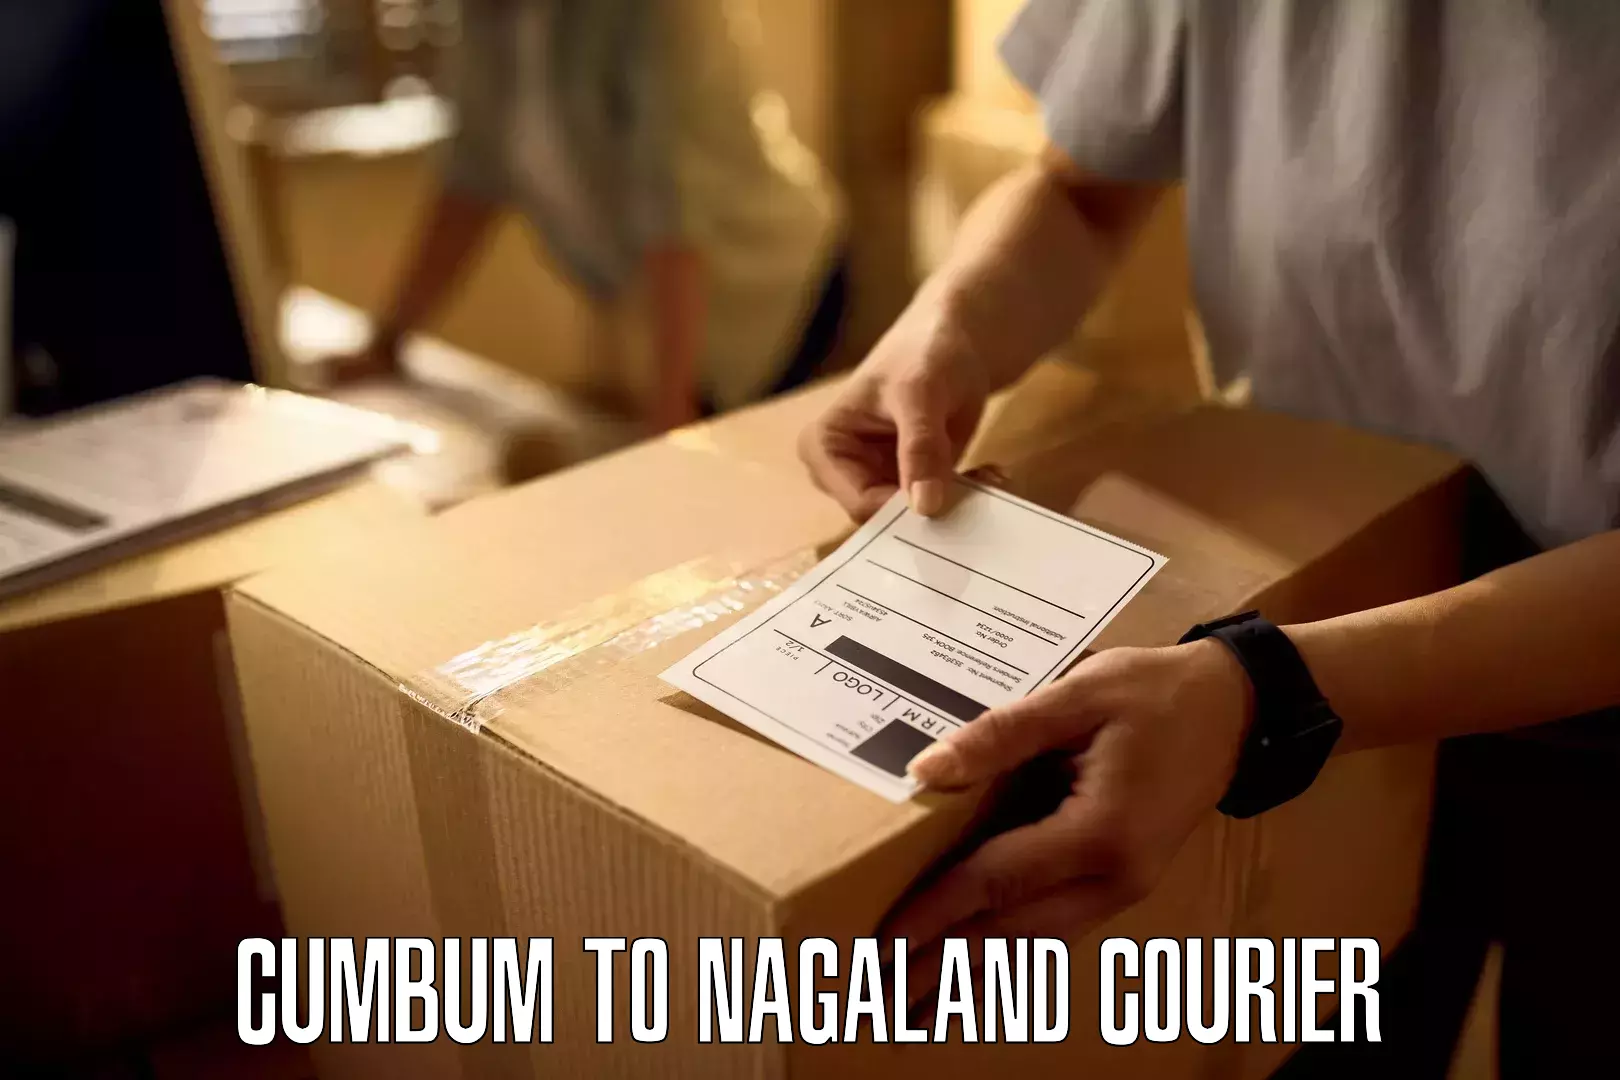 Small business couriers in Cumbum to Nagaland